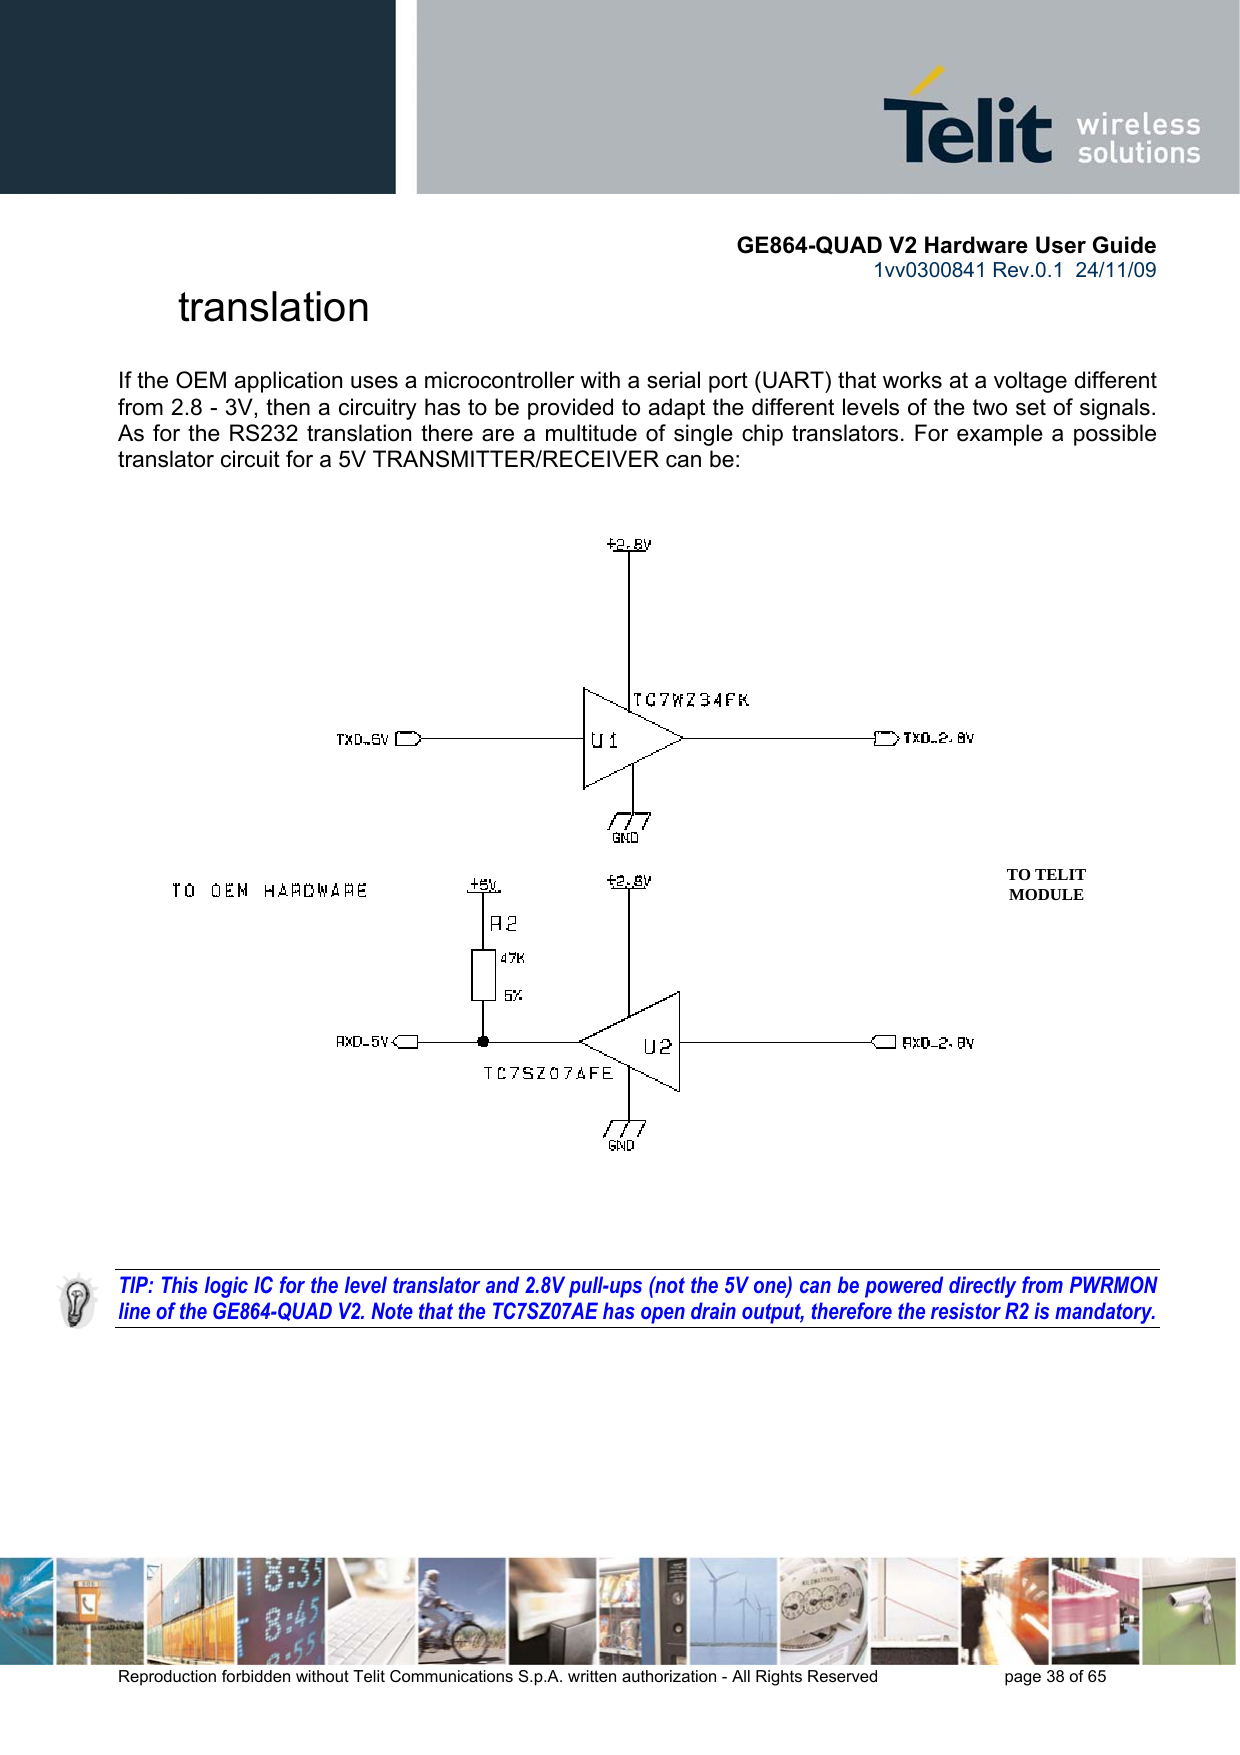       GE864-QUAD V2 Hardware User Guide 1vv0300841 Rev.0.1  24/11/09      Reproduction forbidden without Telit Communications S.p.A. written authorization - All Rights Reserved    page 38 of 65  translation If the OEM application uses a microcontroller with a serial port (UART) that works at a voltage different from 2.8 - 3V, then a circuitry has to be provided to adapt the different levels of the two set of signals. As for the RS232 translation there are a multitude of single chip translators. For example a possible translator circuit for a 5V TRANSMITTER/RECEIVER can be:      TIP: This logic IC for the level translator and 2.8V pull-ups (not the 5V one) can be powered directly from PWRMON line of the GE864-QUAD V2. Note that the TC7SZ07AE has open drain output, therefore the resistor R2 is mandatory.  TO TELIT MODULE 